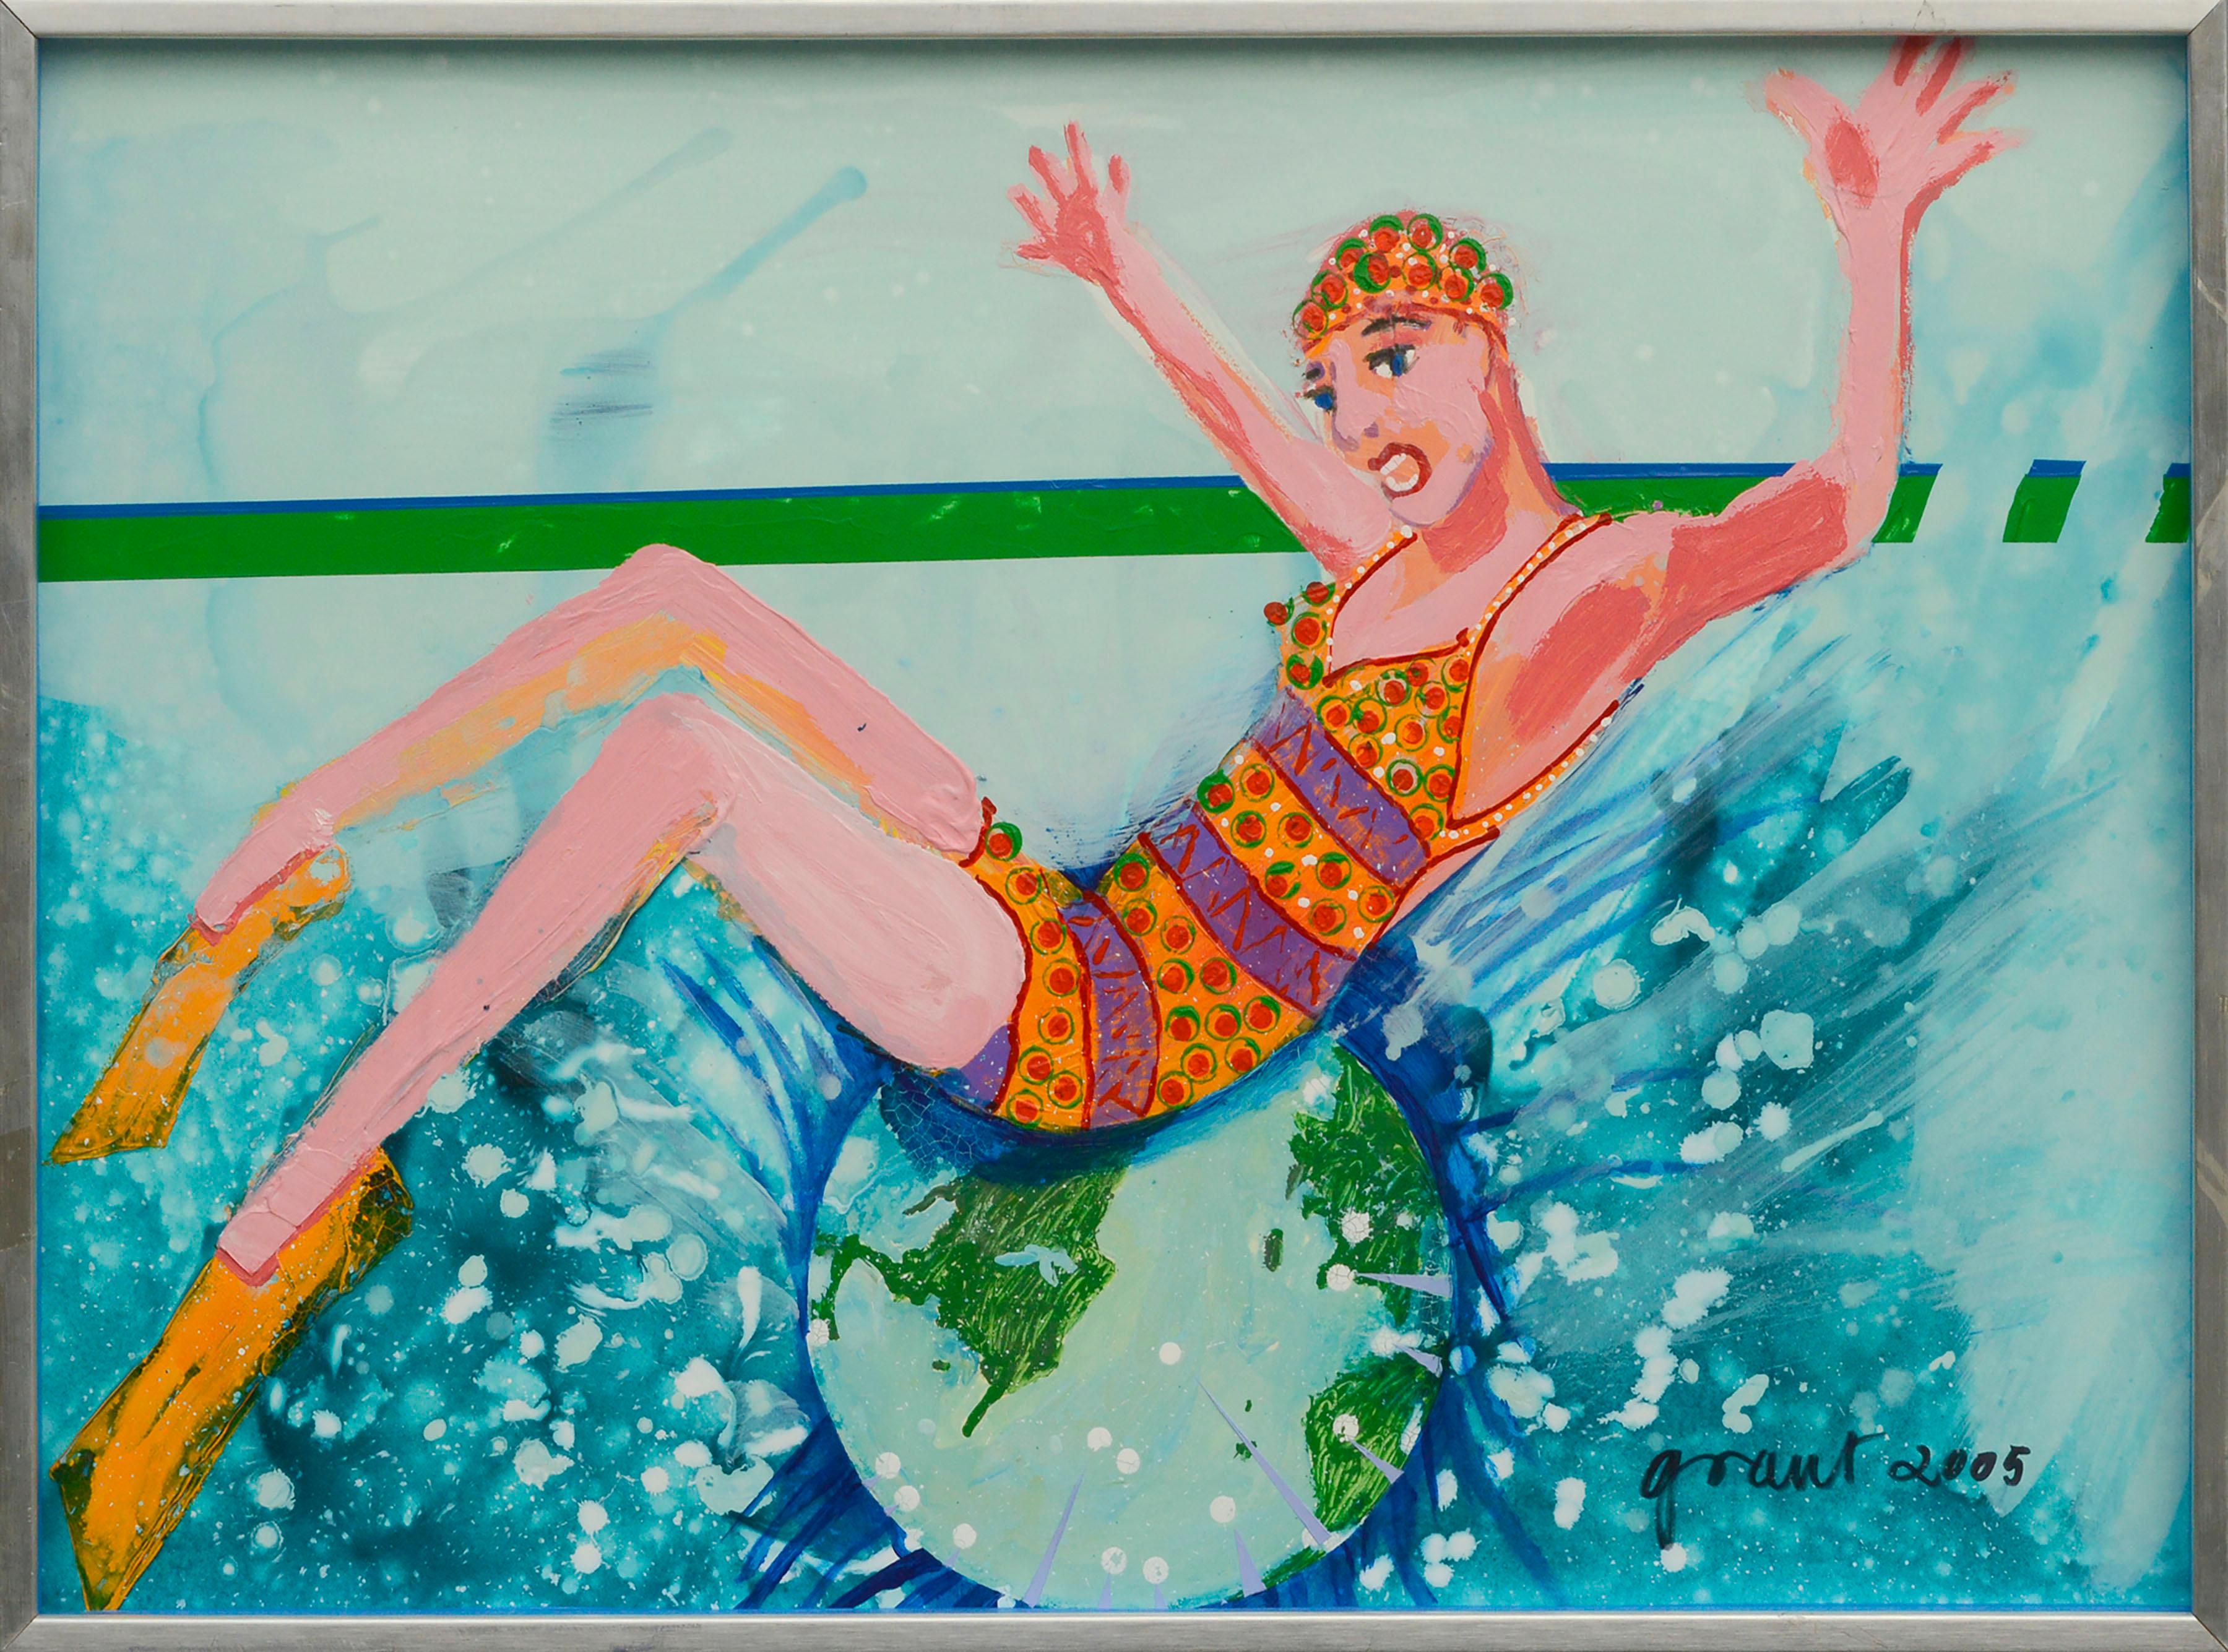 Marc Foster Grant Abstract Painting - "Make a Splash", Large-Scale Figurative Abstract with Swimmer in Pool 